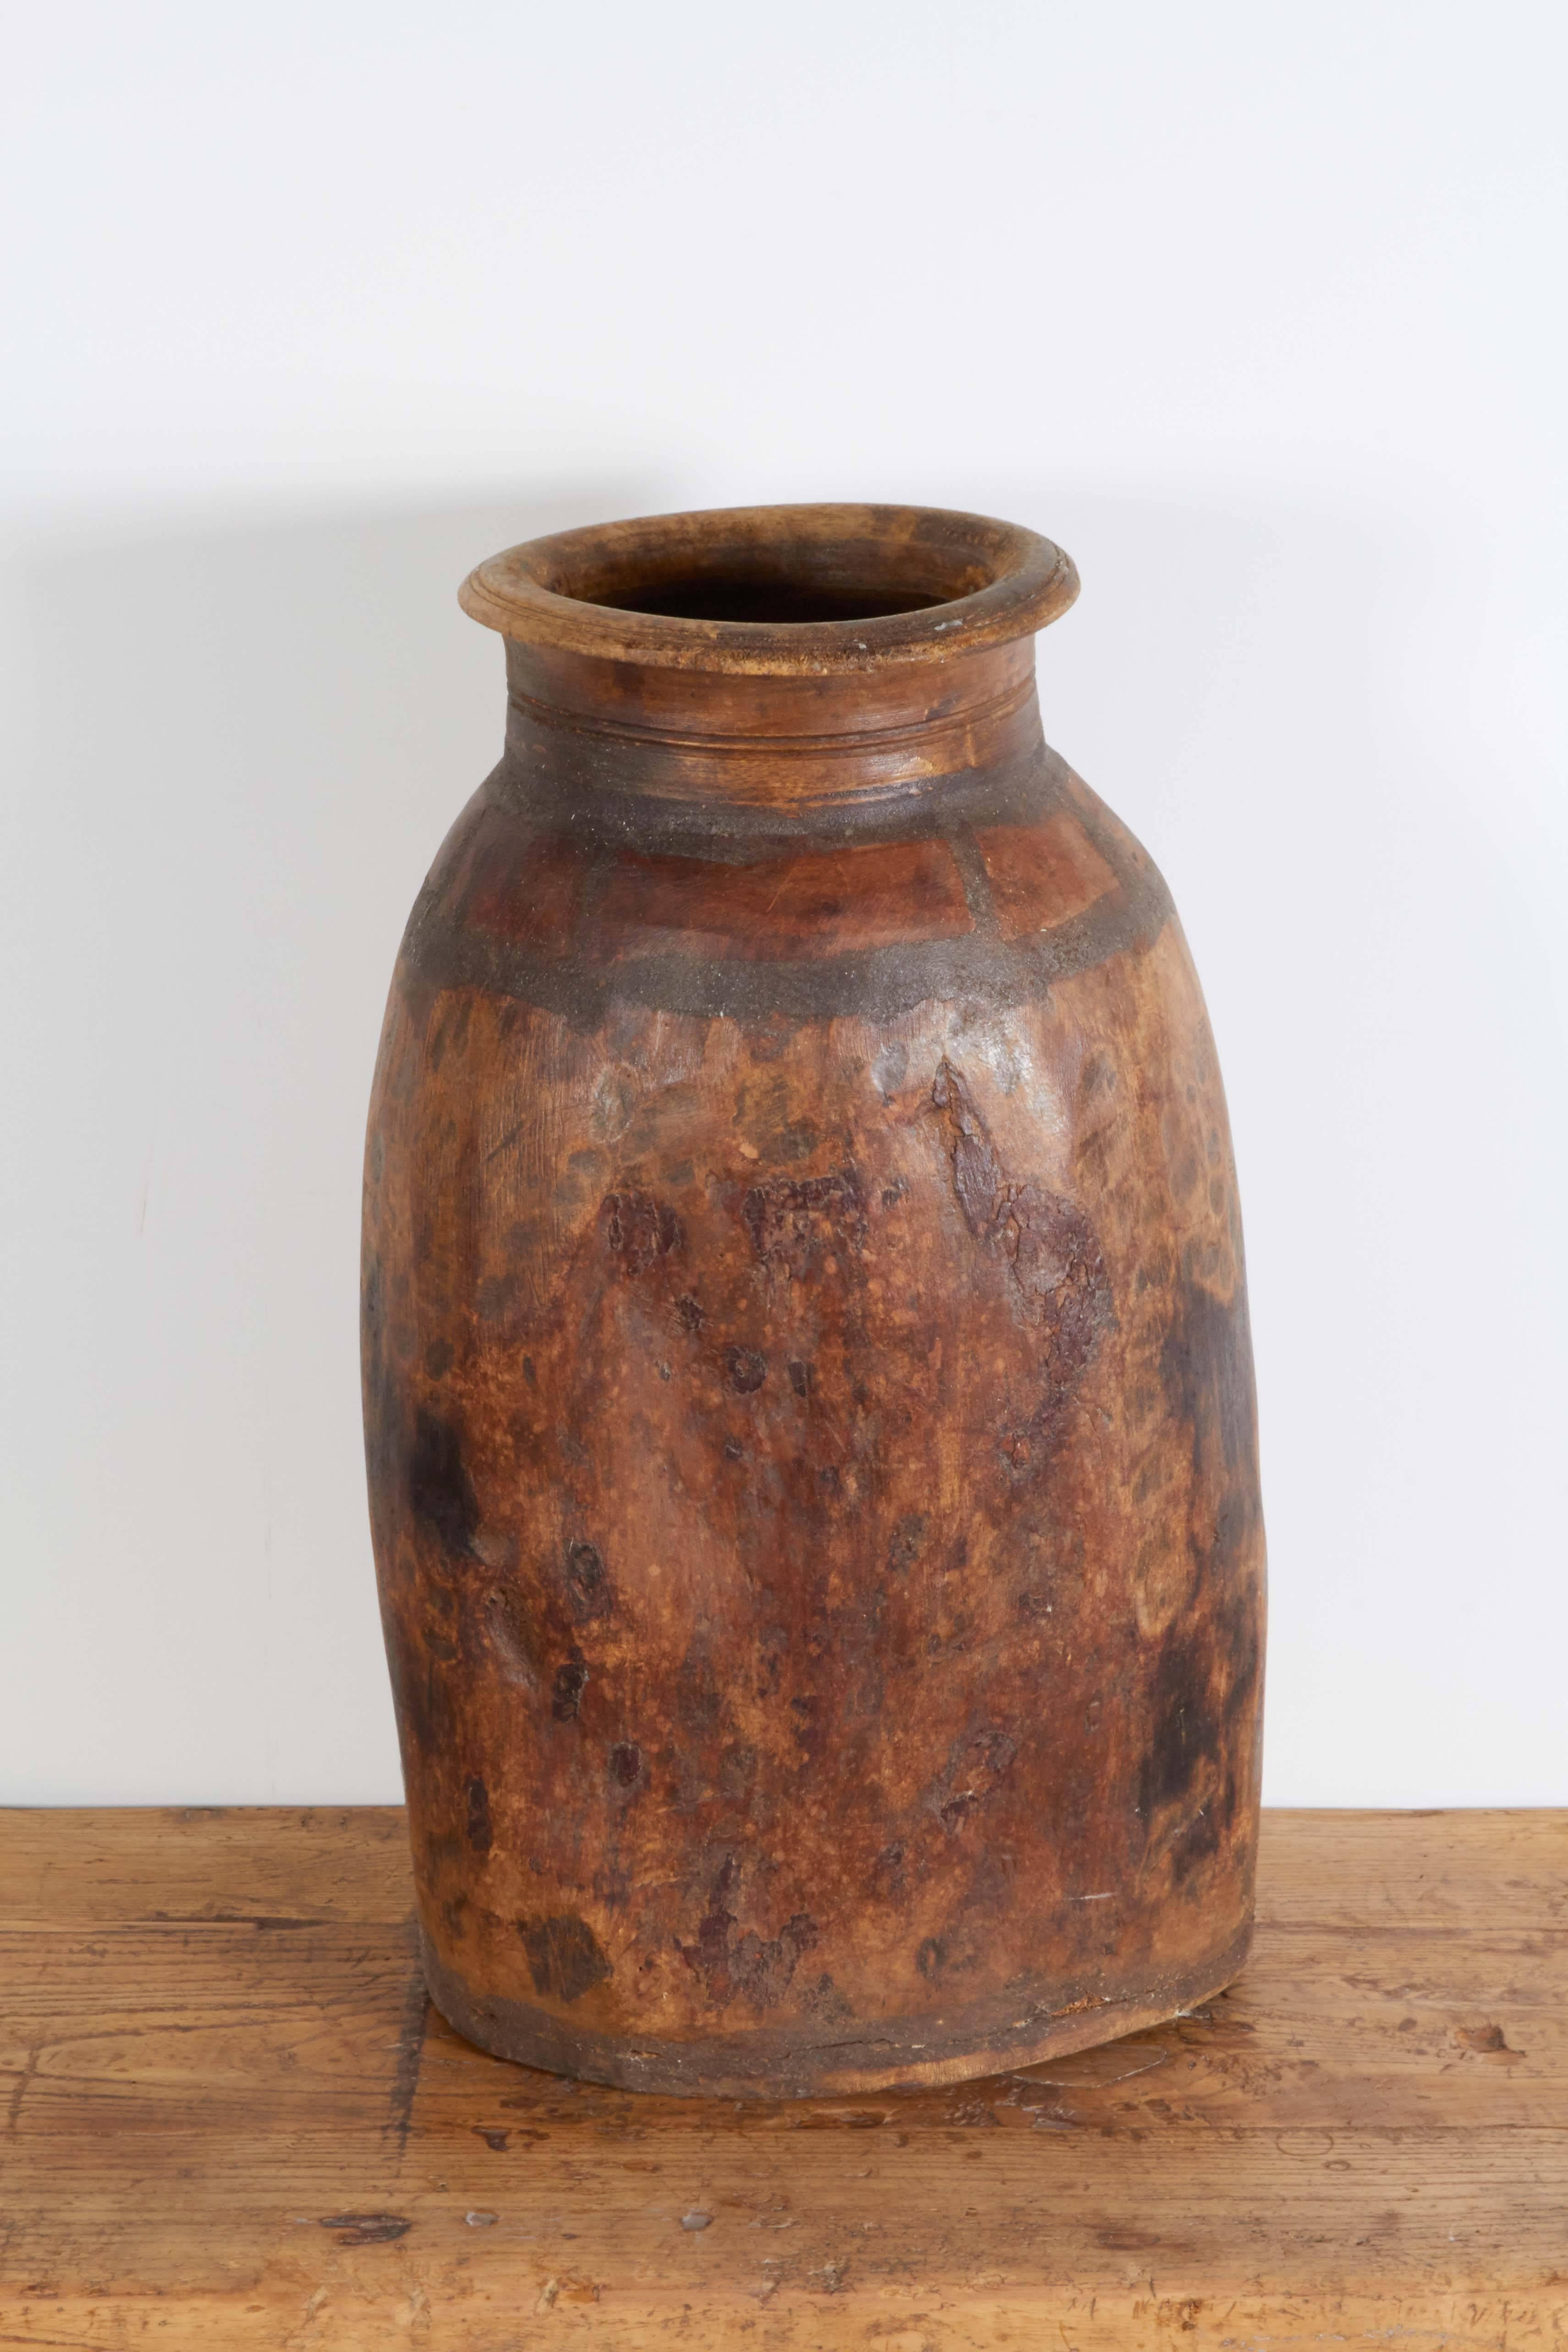 An unusual antique wooden grain container with a Classic, graceful shape and remarkable, beautiful patina throughout. This piece gives a real sense of place, period and history. From Thailand, circa 1900.
M939.